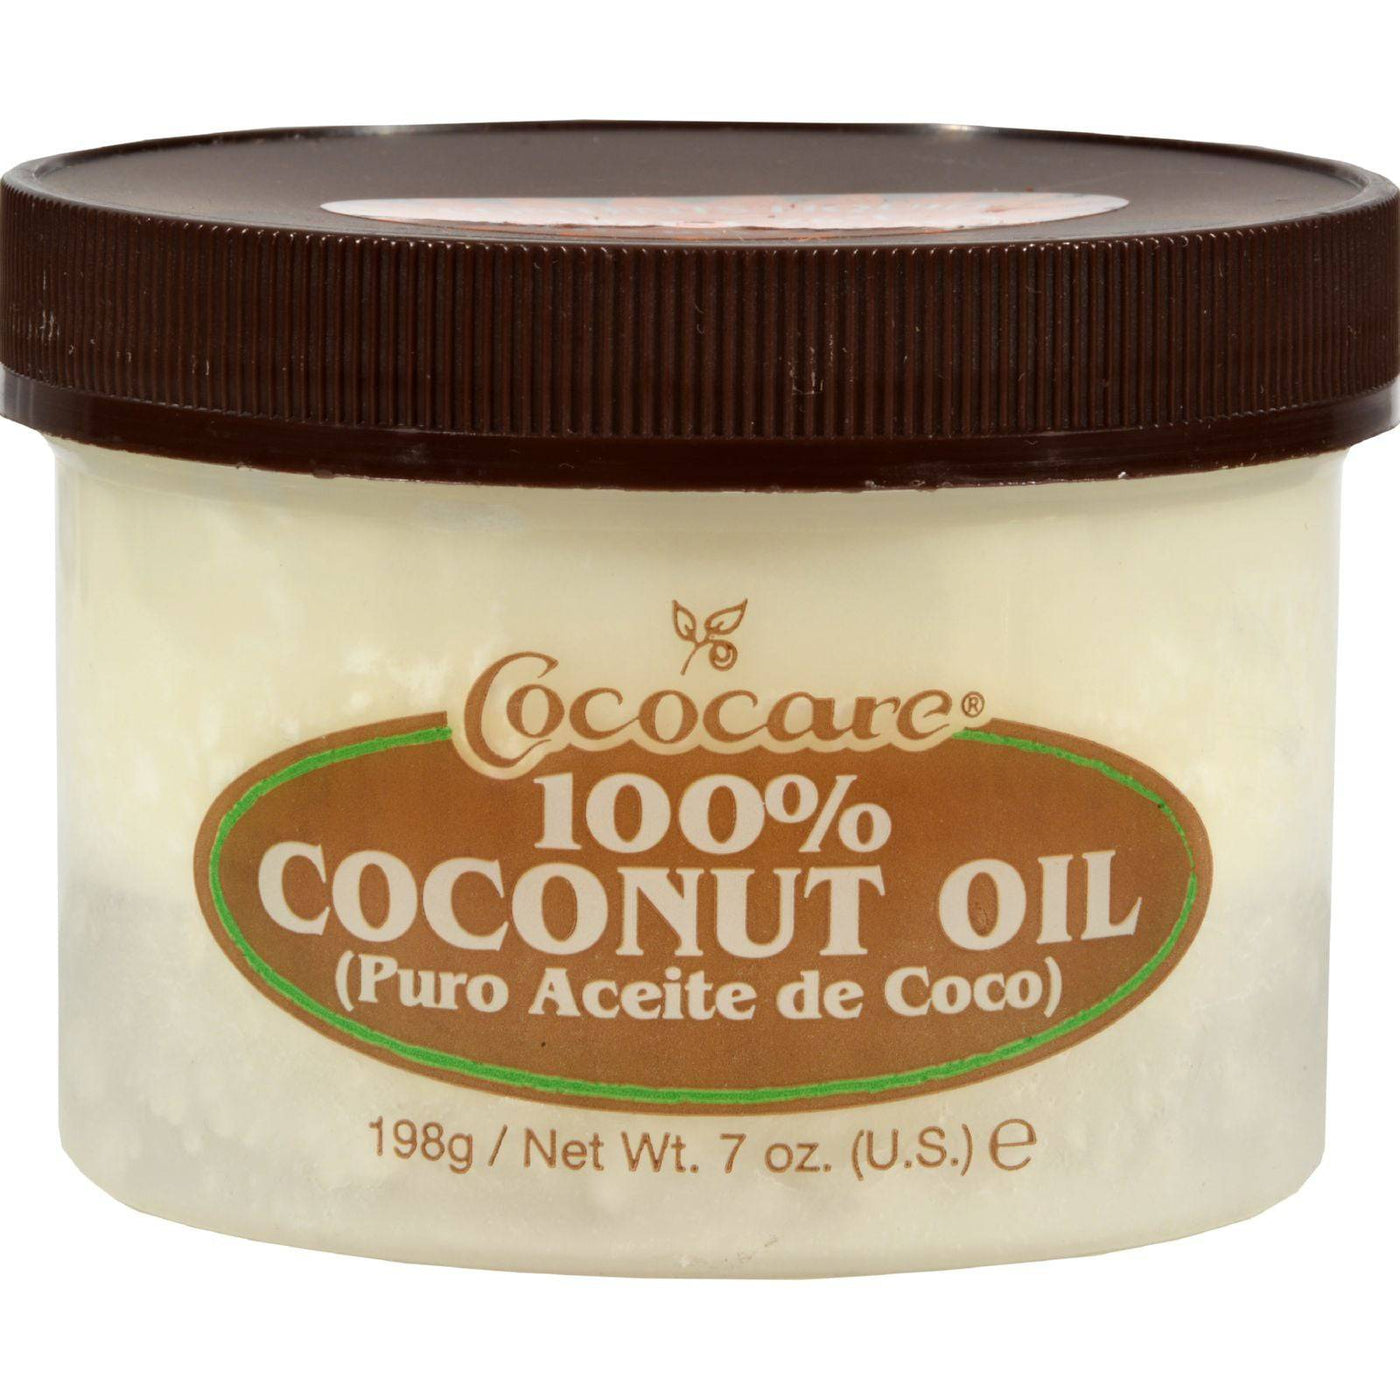 Buy Cococare 100% Coconut Oil - 7 Oz  at OnlyNaturals.us